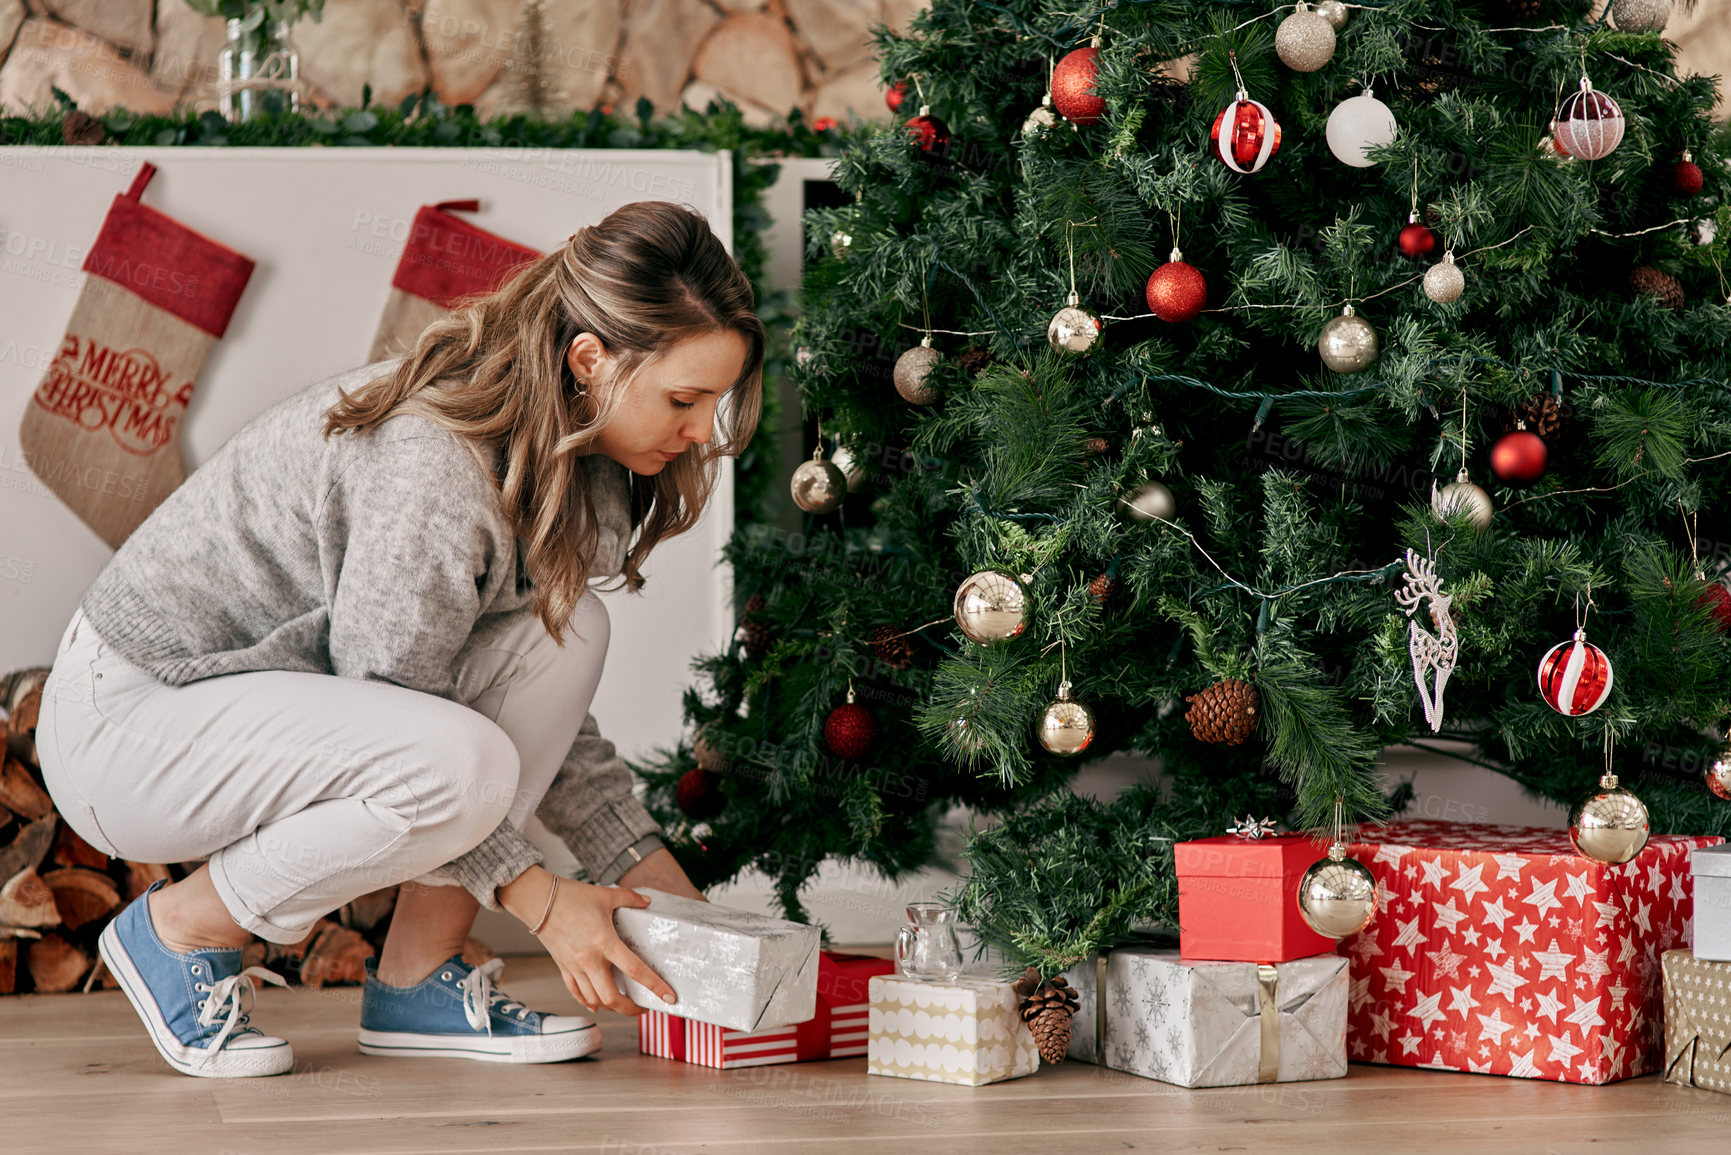 Buy stock photo Christmas, gift by tree and holiday celebration with woman, decoration, festive box and tradition at family home. Presents under the Christmas tree, celebrate and packing, ornament and creative.